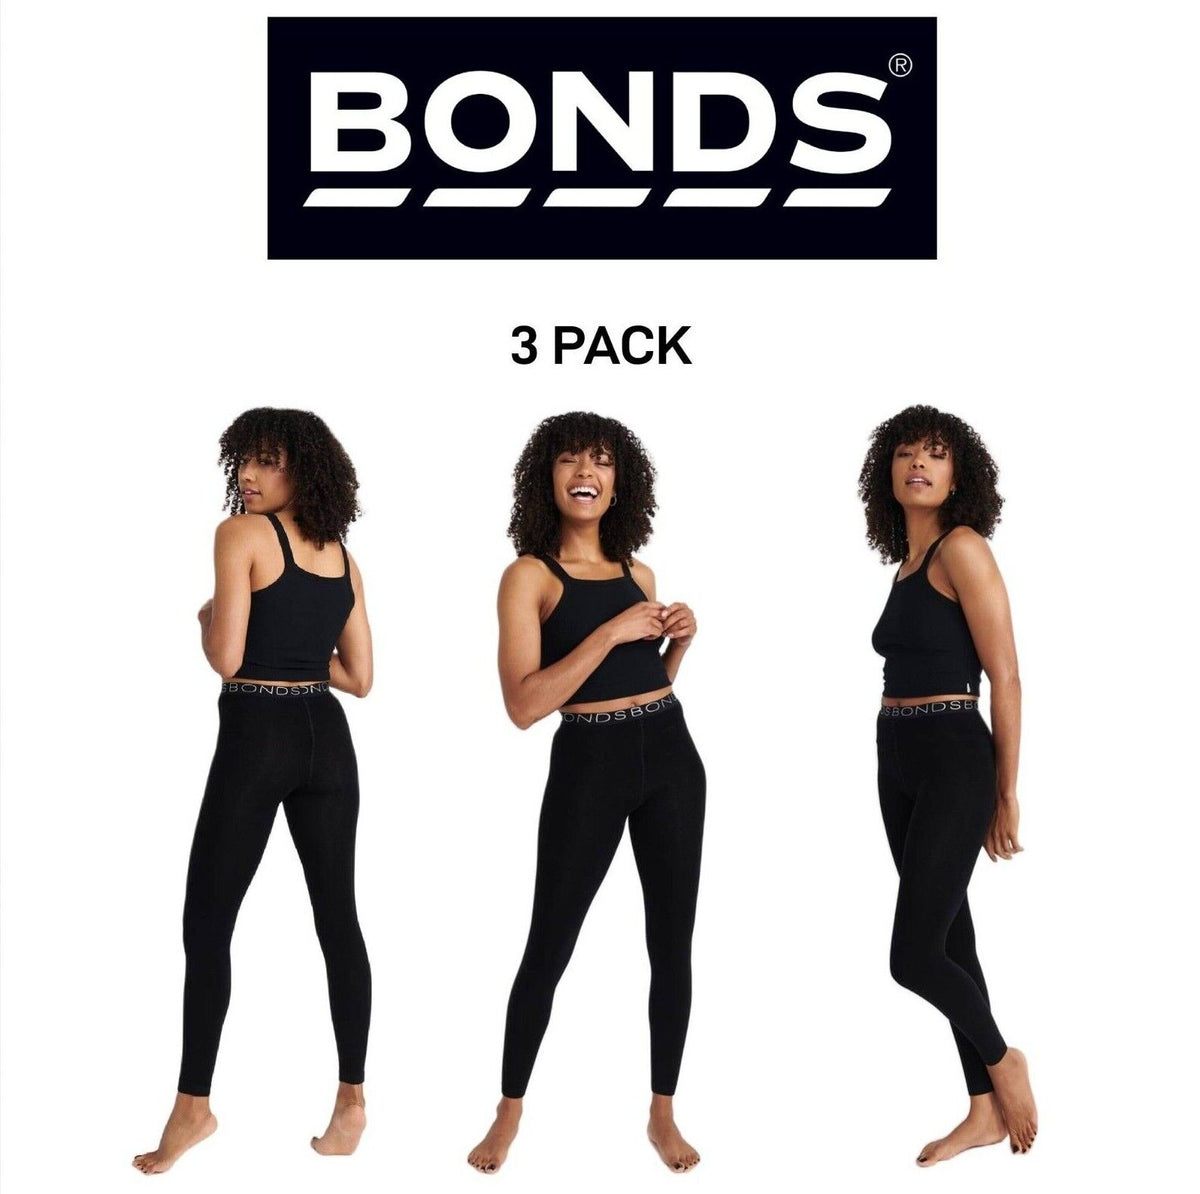 Bonds Womens Fleecy Legging Soft Fleece Fabric for Ultimate Warmth 3 Pack L79542